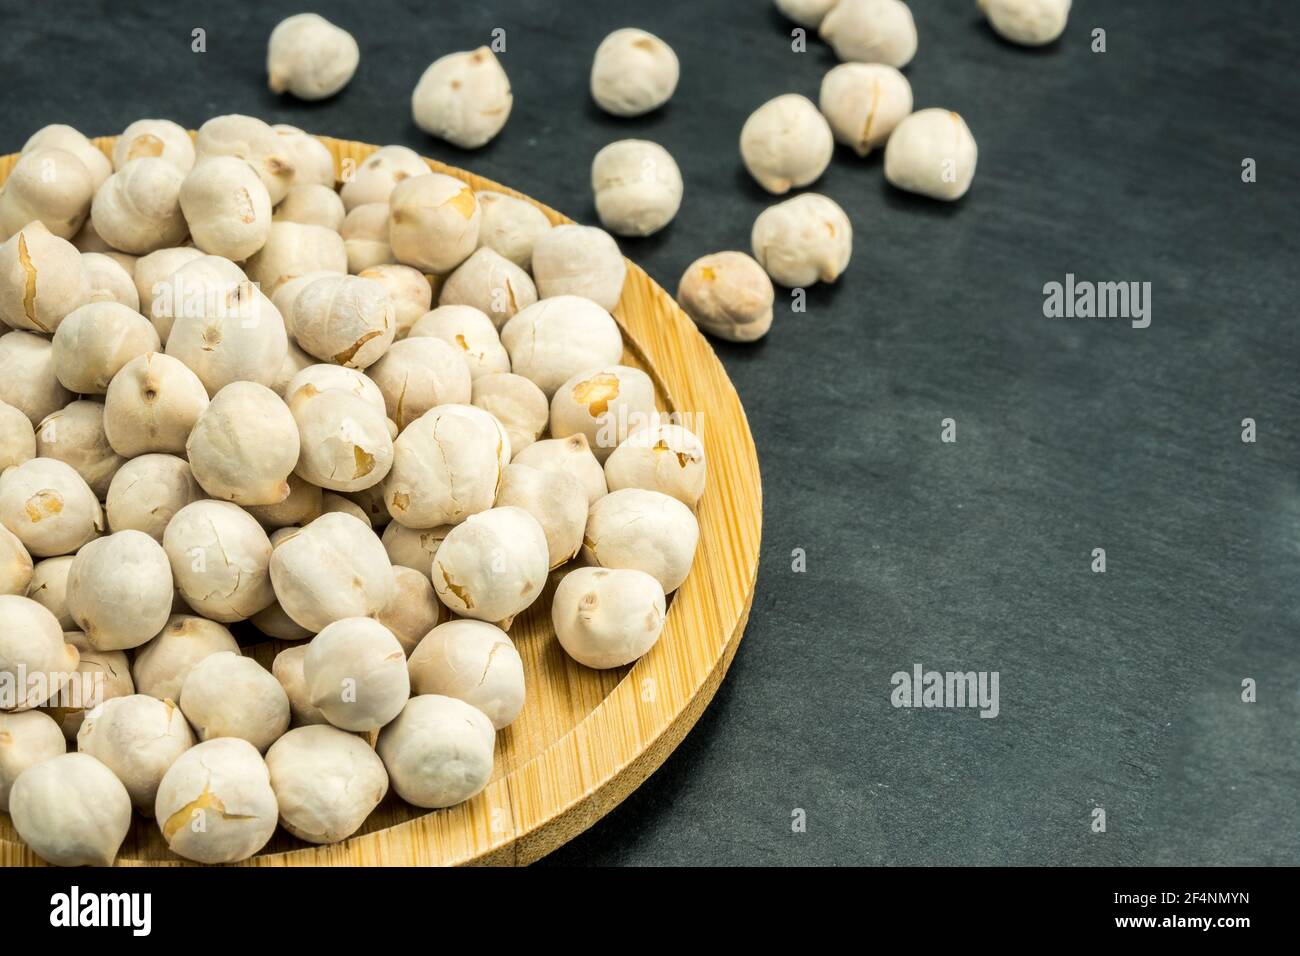 White chickpeas scattered on a black stone background. Stock Photo